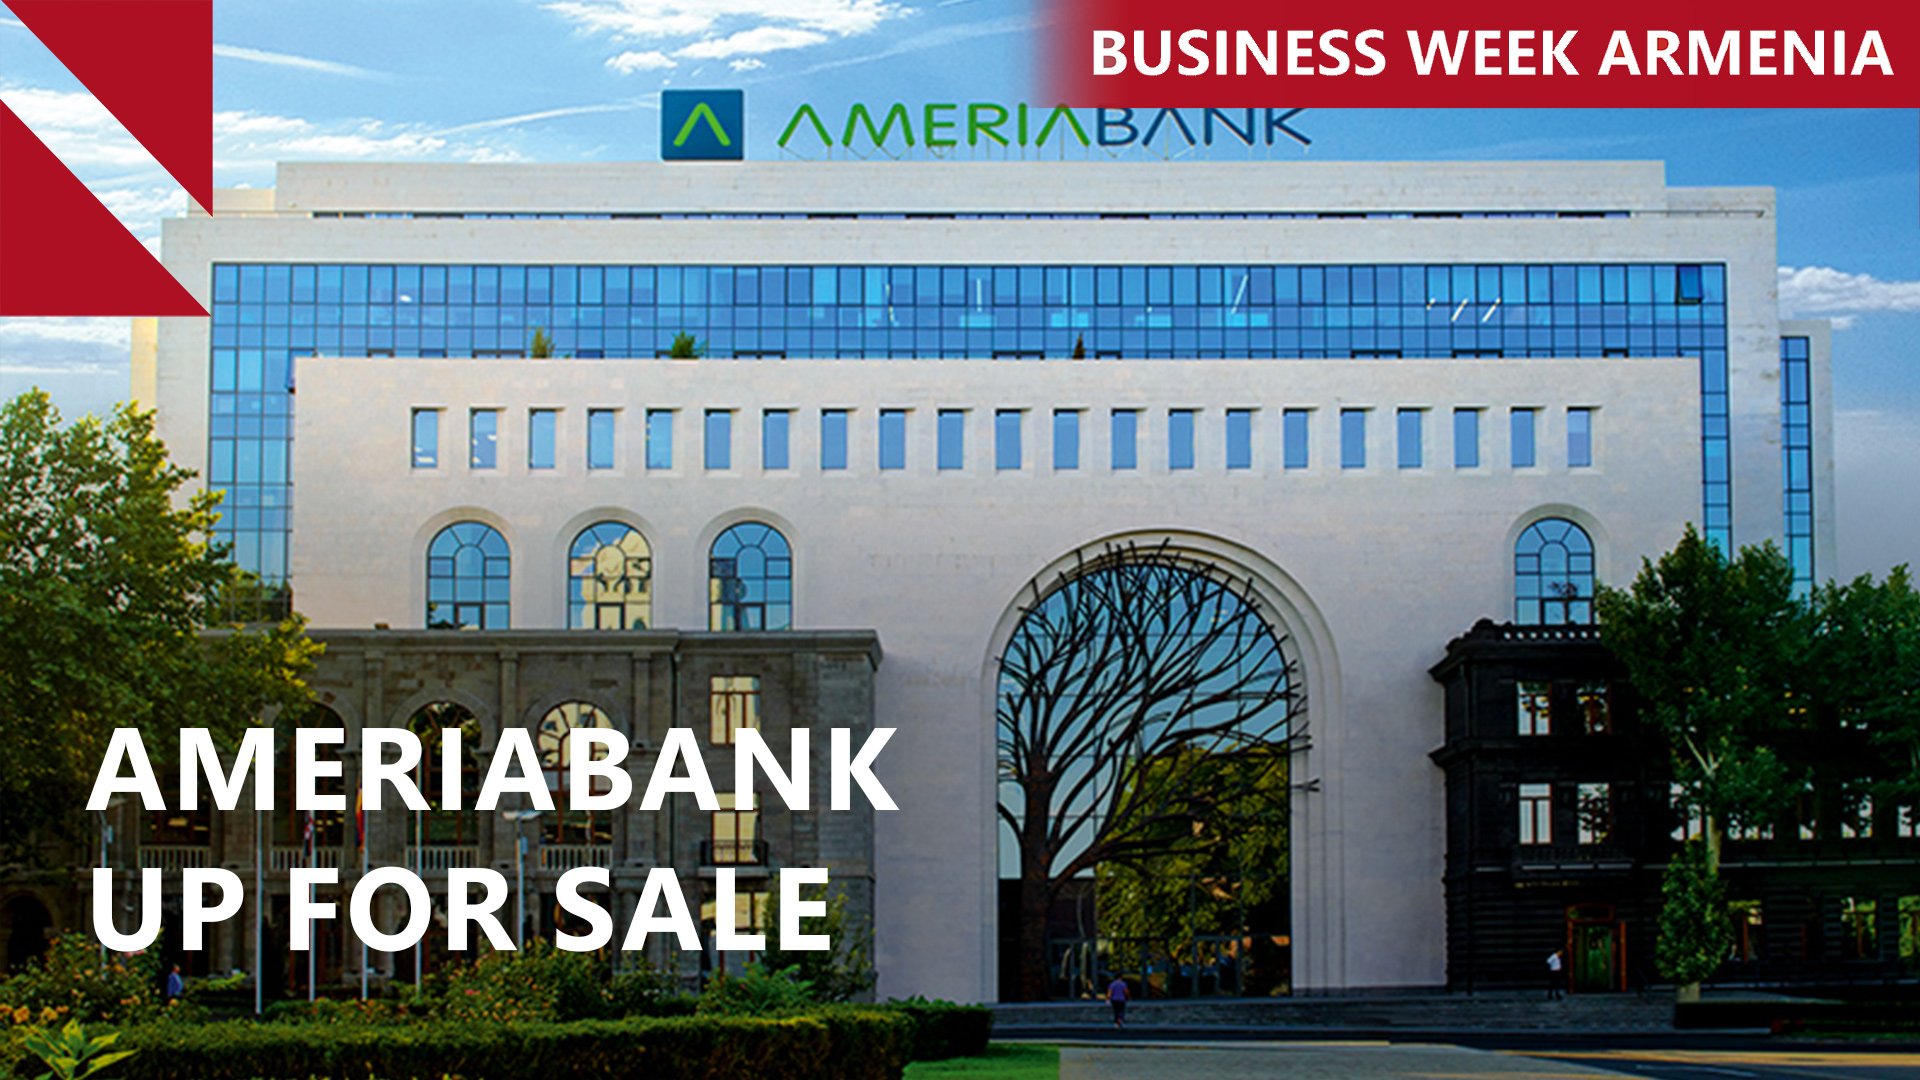 Armenia’s Central Bank greenlights Ameriabank sale: THIS WEEK IN BUSINESS